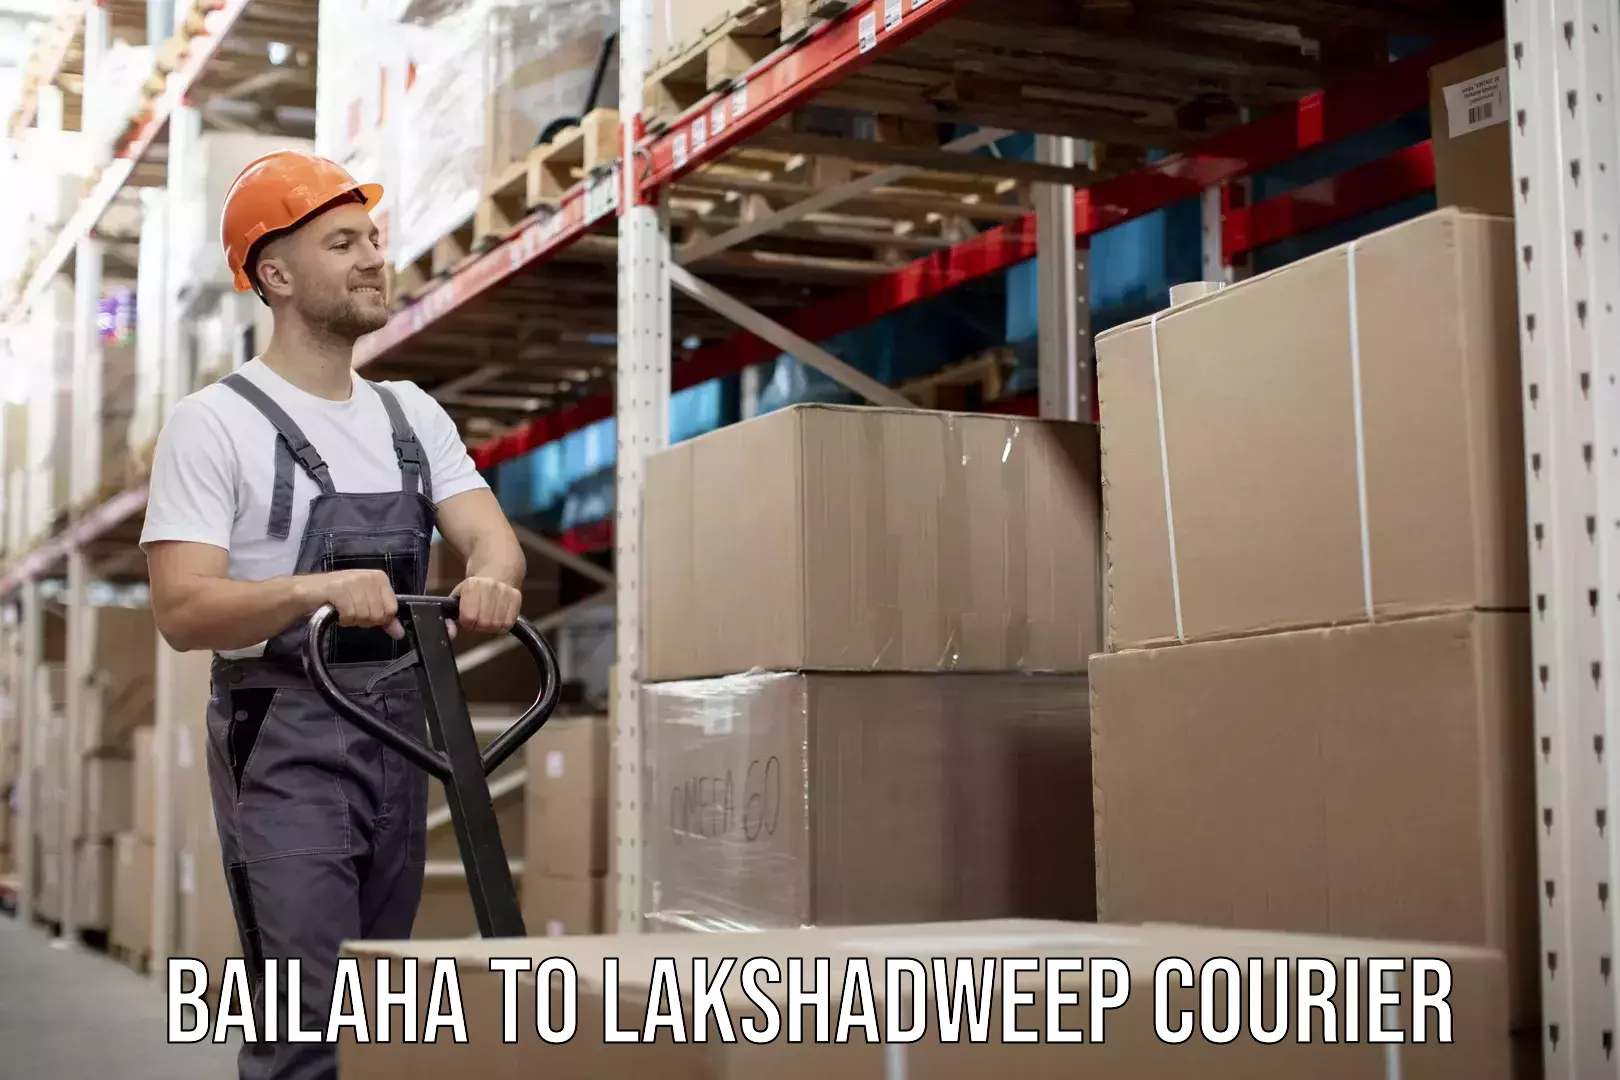 Quick dispatch service in Bailaha to Lakshadweep